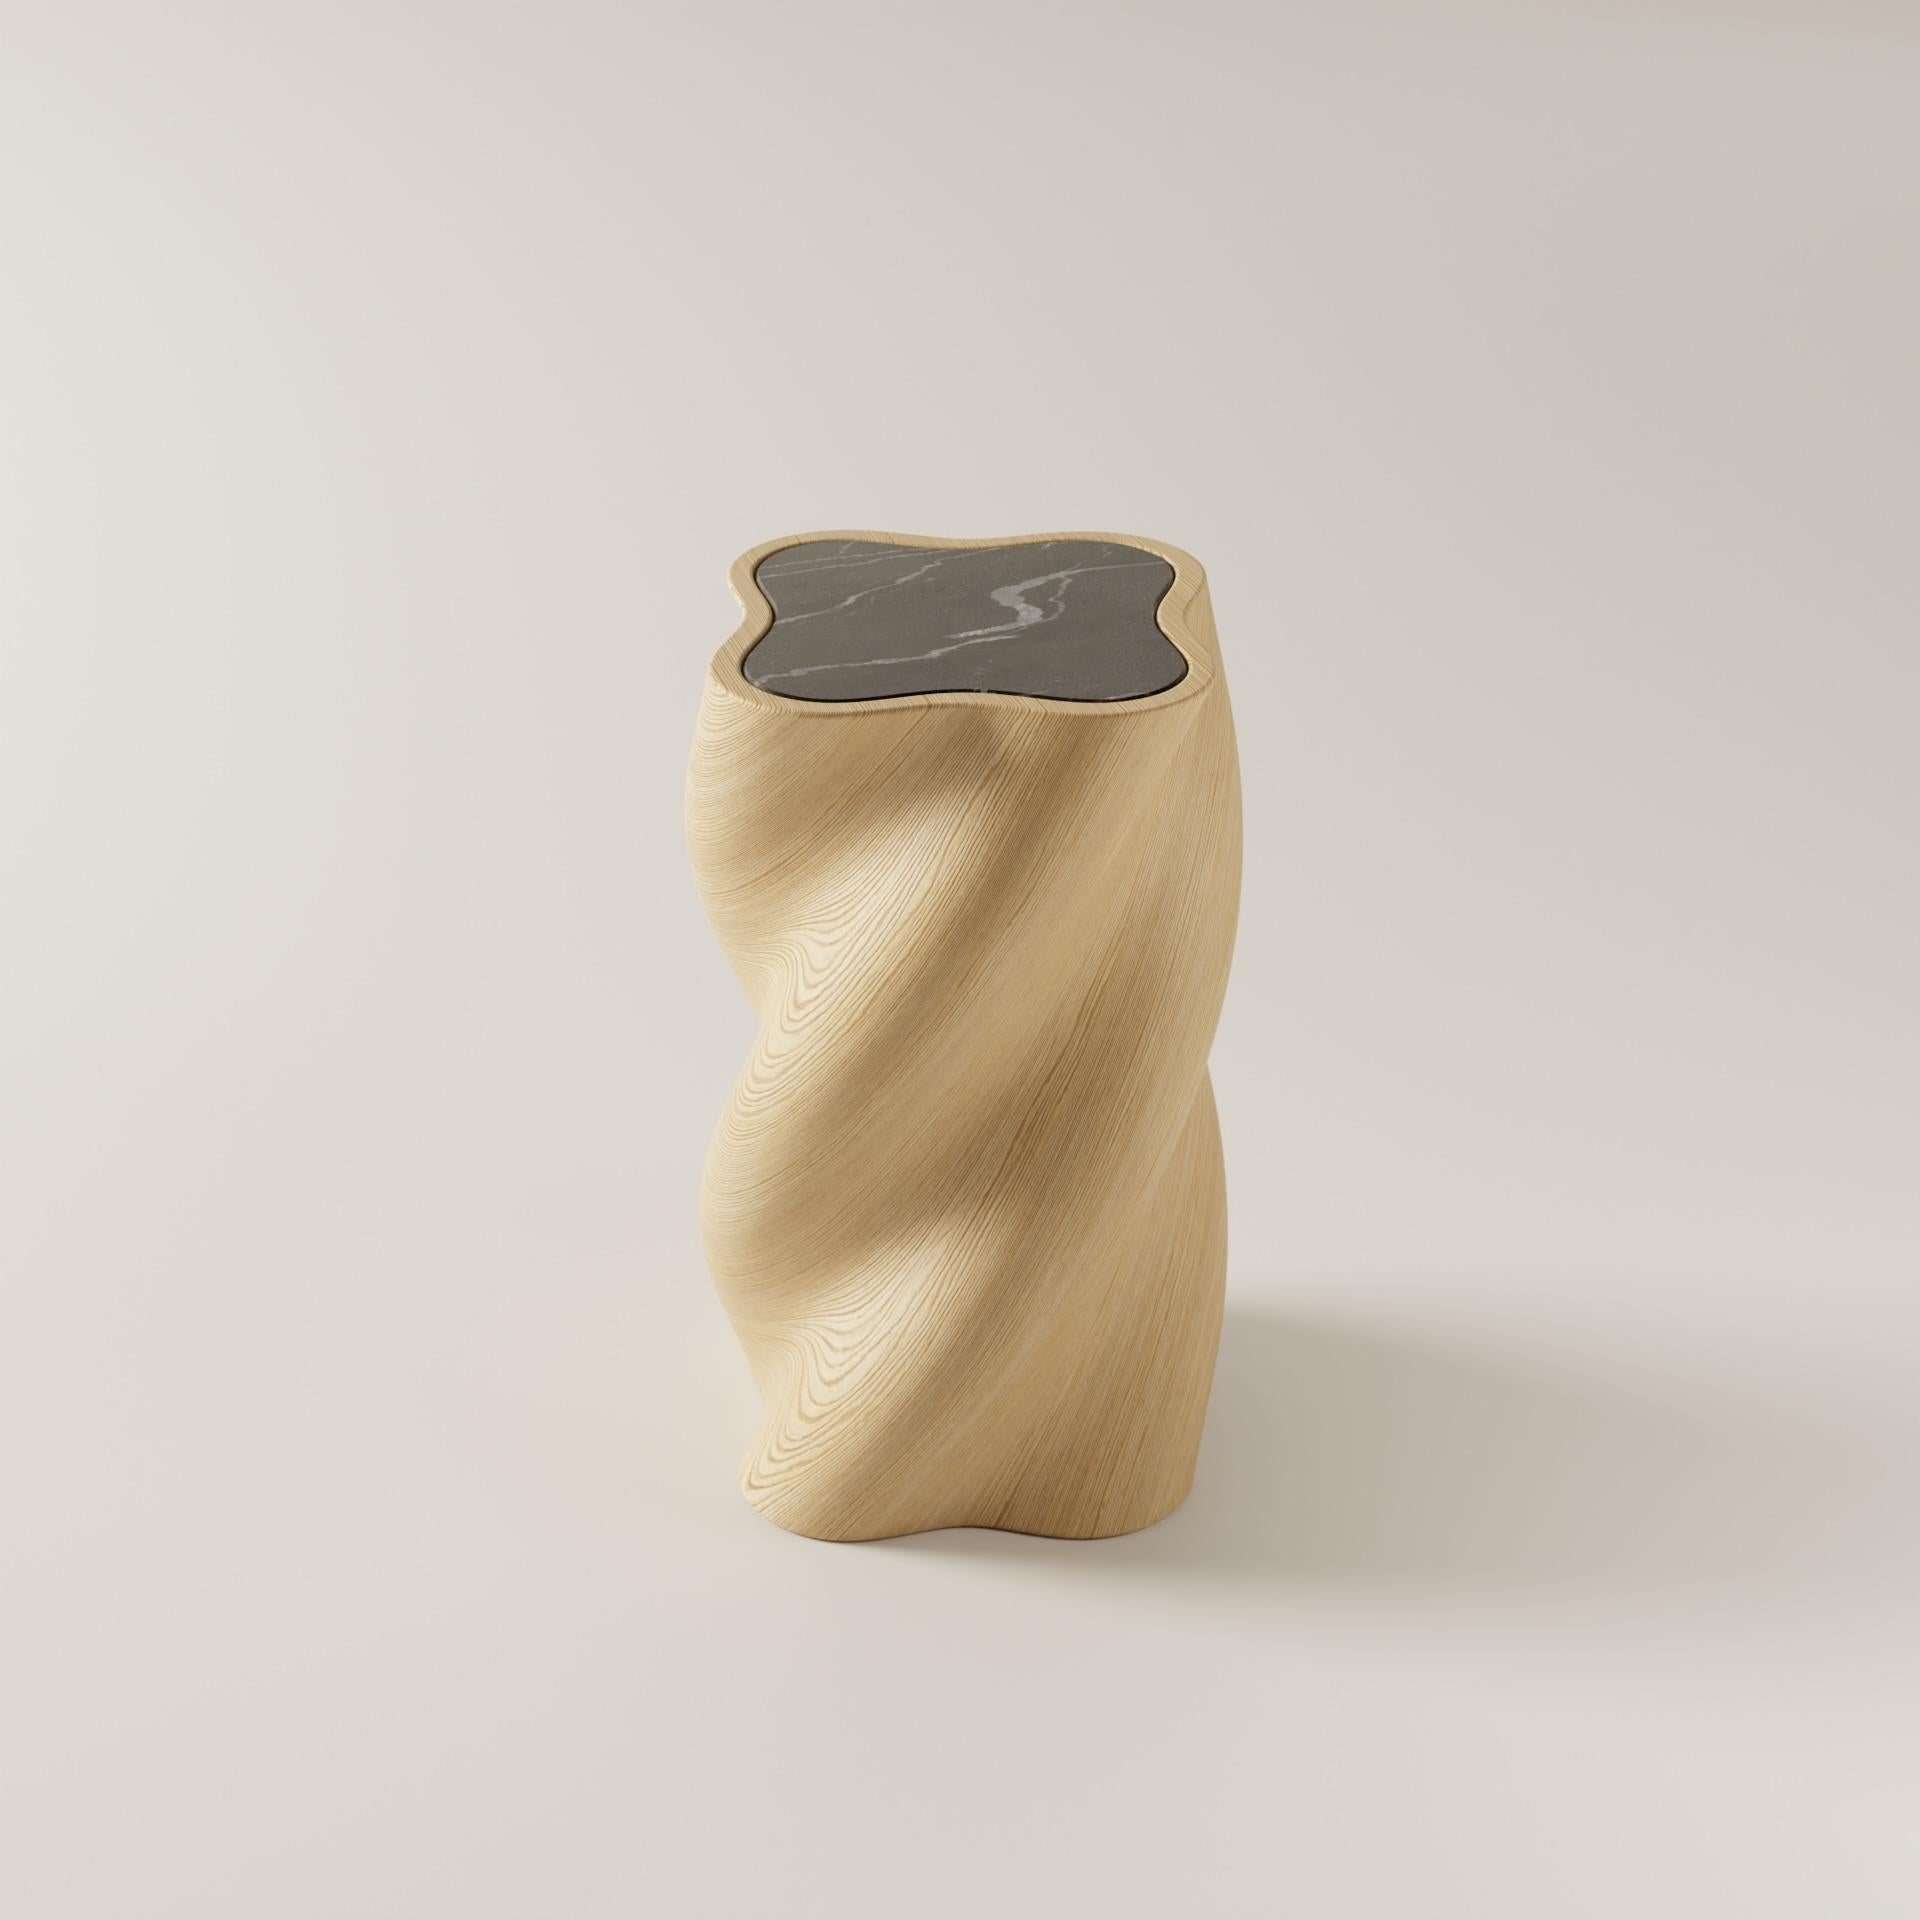 The fUUUUsillo side table is inspired by the BURGIO. team’s favorite pasta shape. Made in Italy, the clever accent table is a work of master craftsmanship and material, to be placed in any room or environment. This fUUUUsillo is made of durable